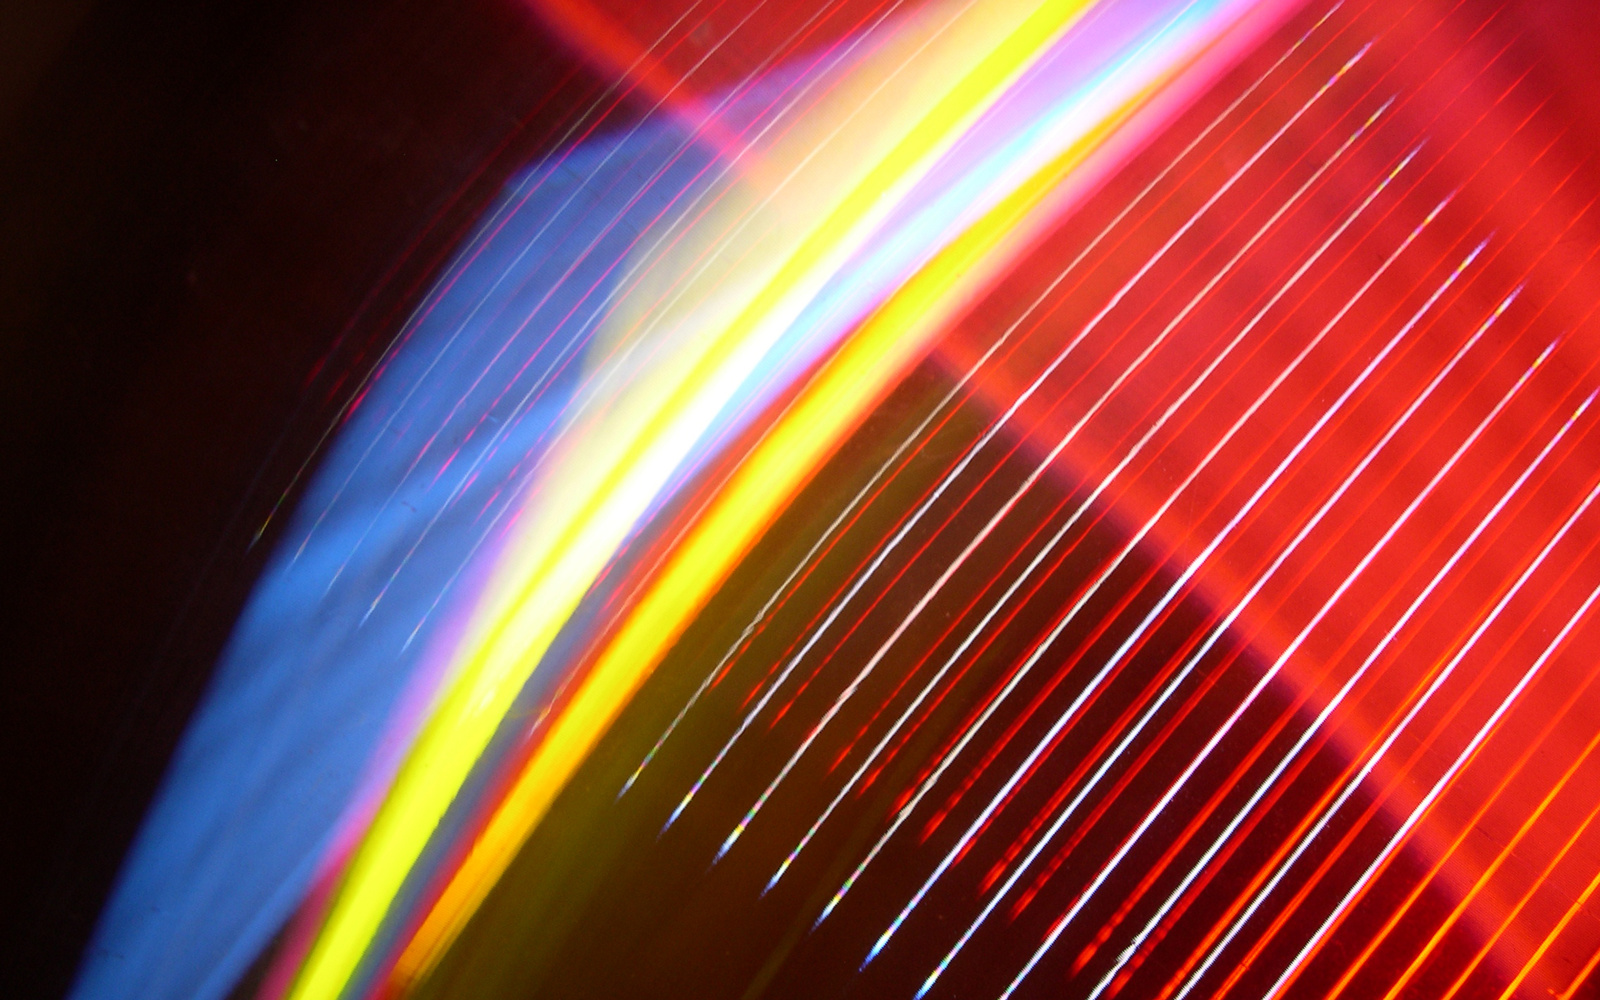 The picture shows a four-color light installation